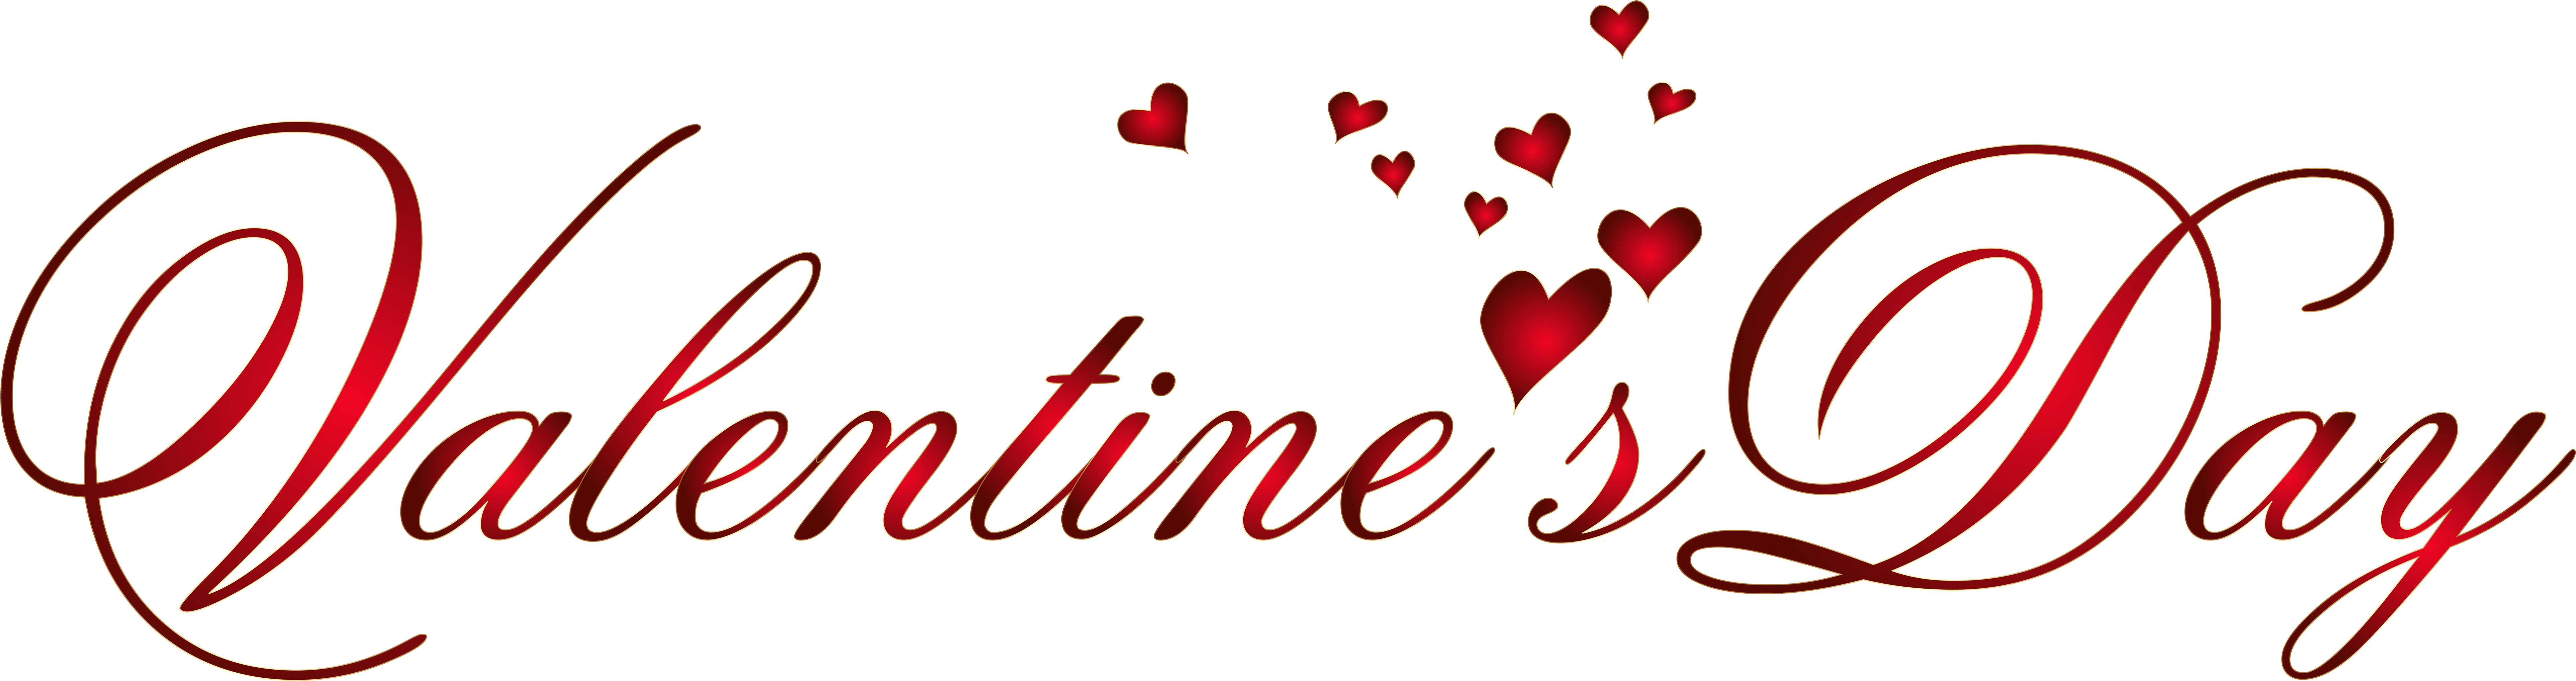 Valentines Day Calligraphy Hearts PNG